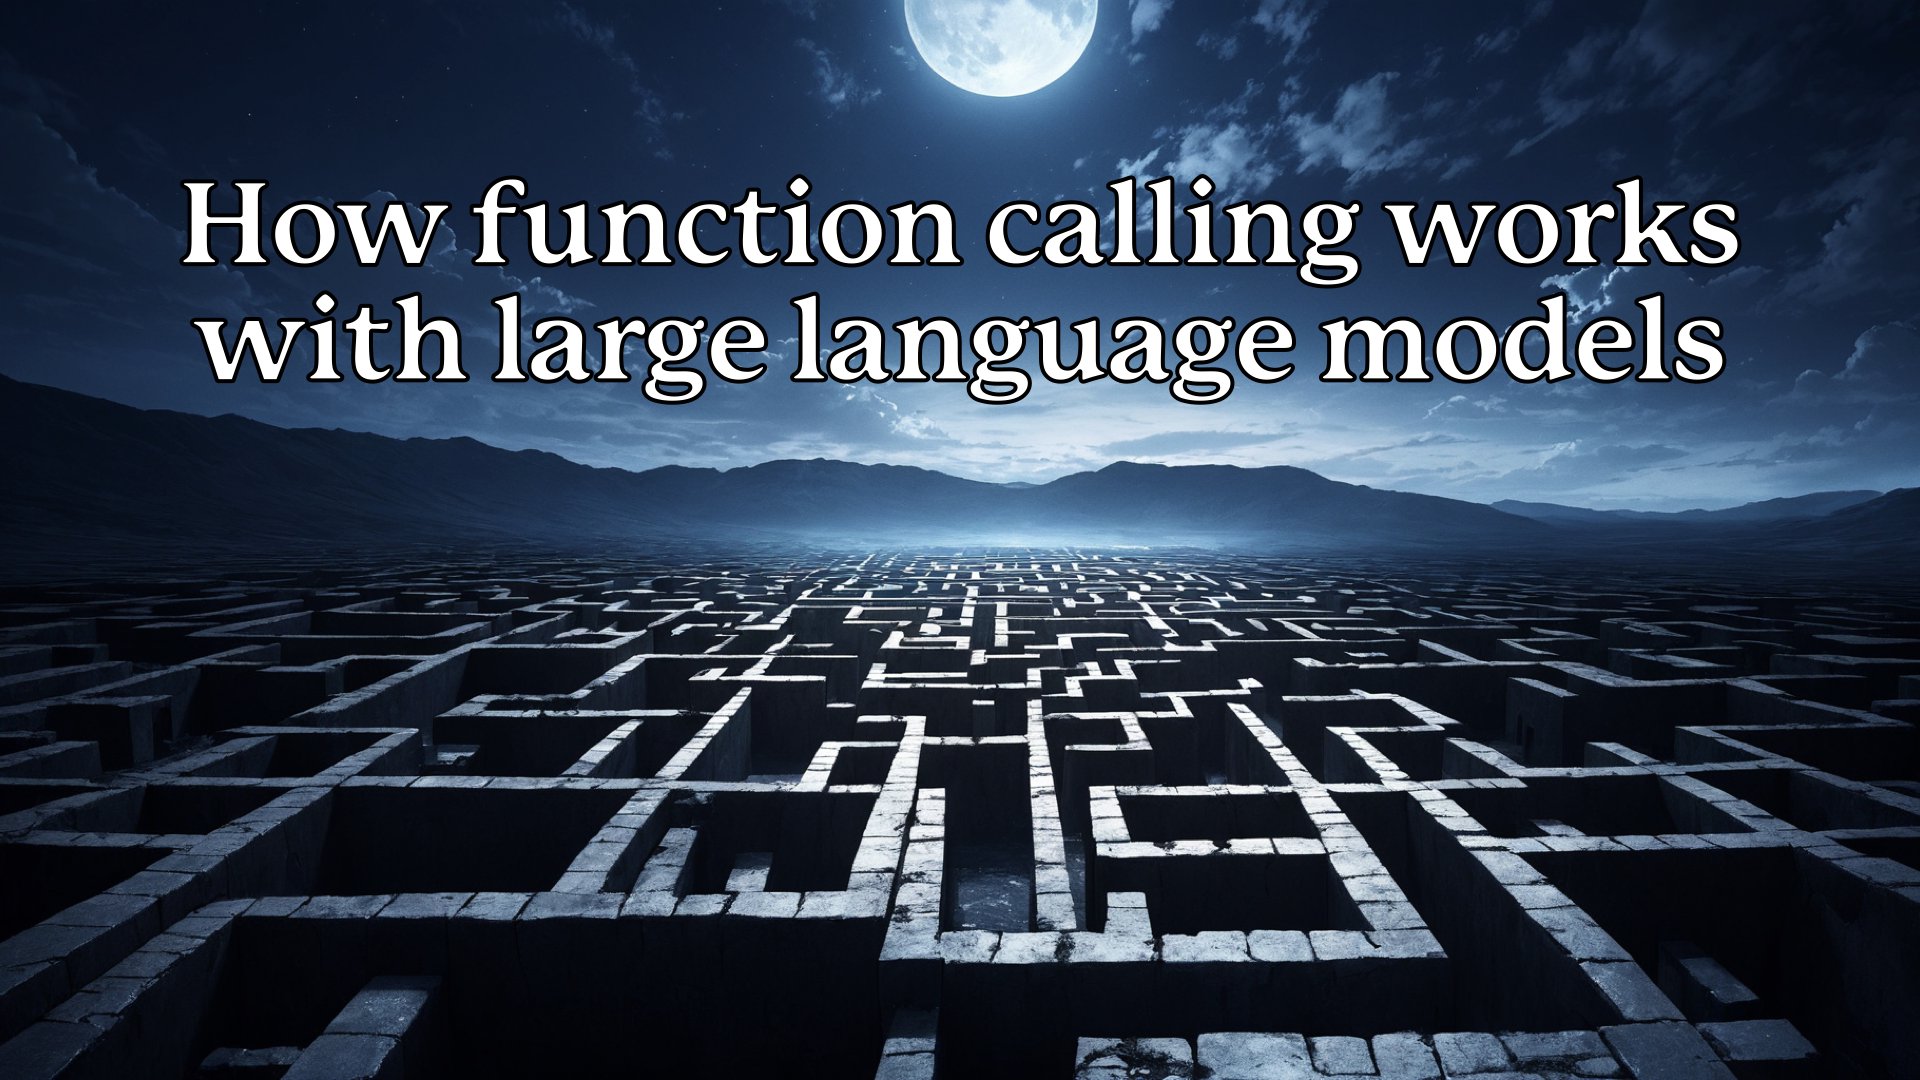 The text 'How function calling works with large language models' in big bold white letters with a black outline on top of a maze in the background.